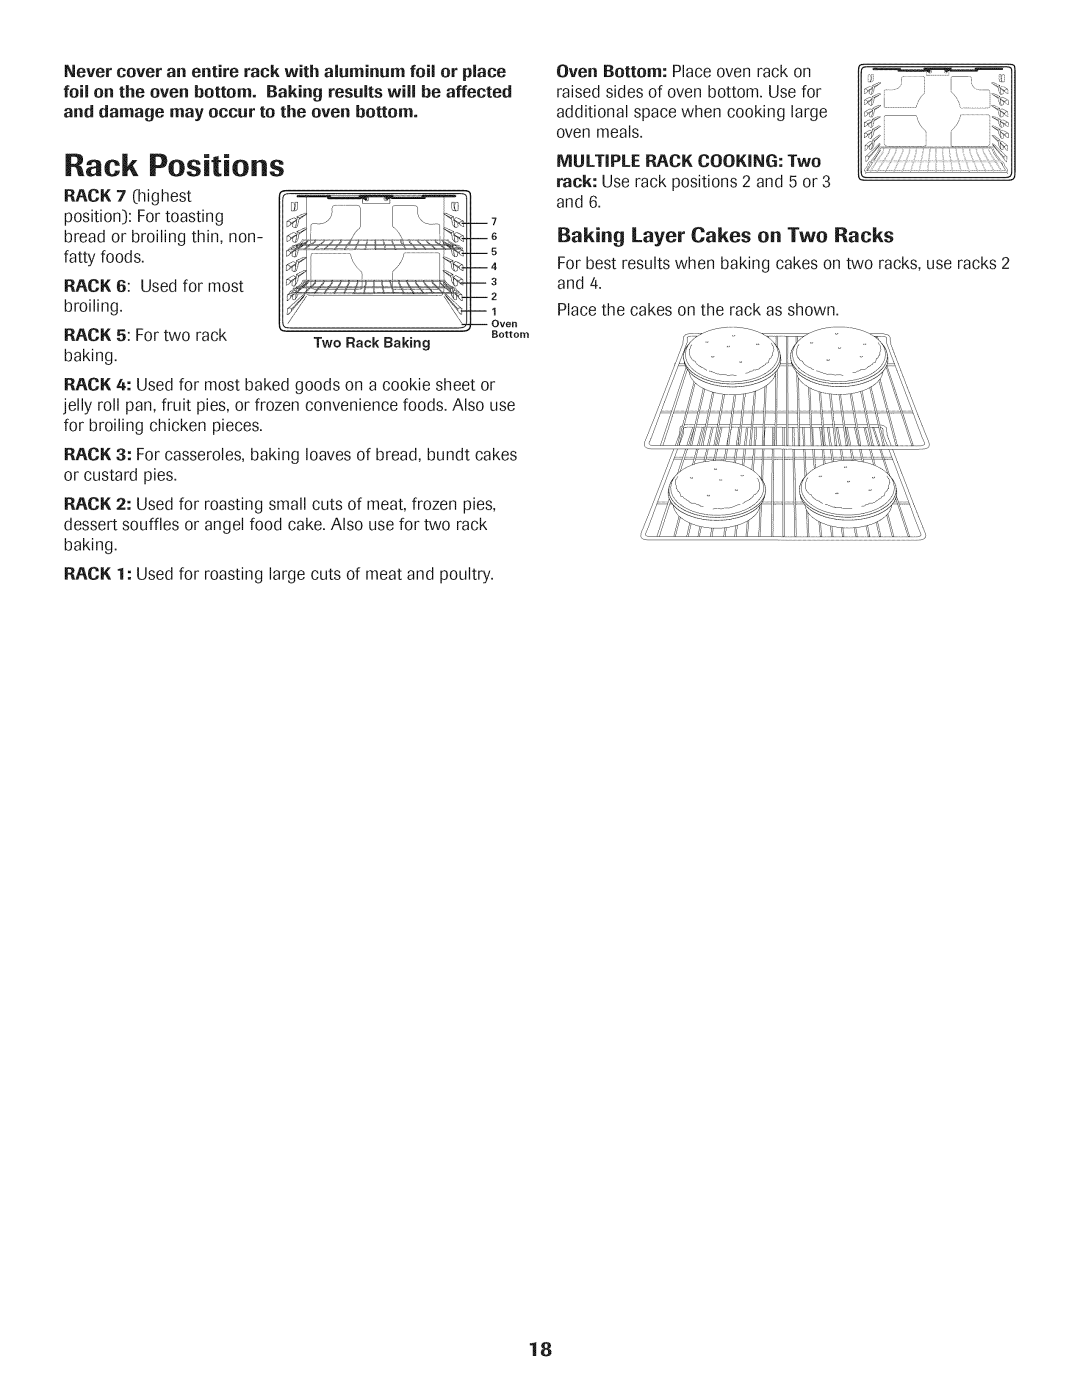 Maytag AGS1740BDQ, AGS1740BDW, 8113P592-60 Rack Positions, Baking Layer Cakes on Two Racks, MULTIPLE RACK COOKING Two 